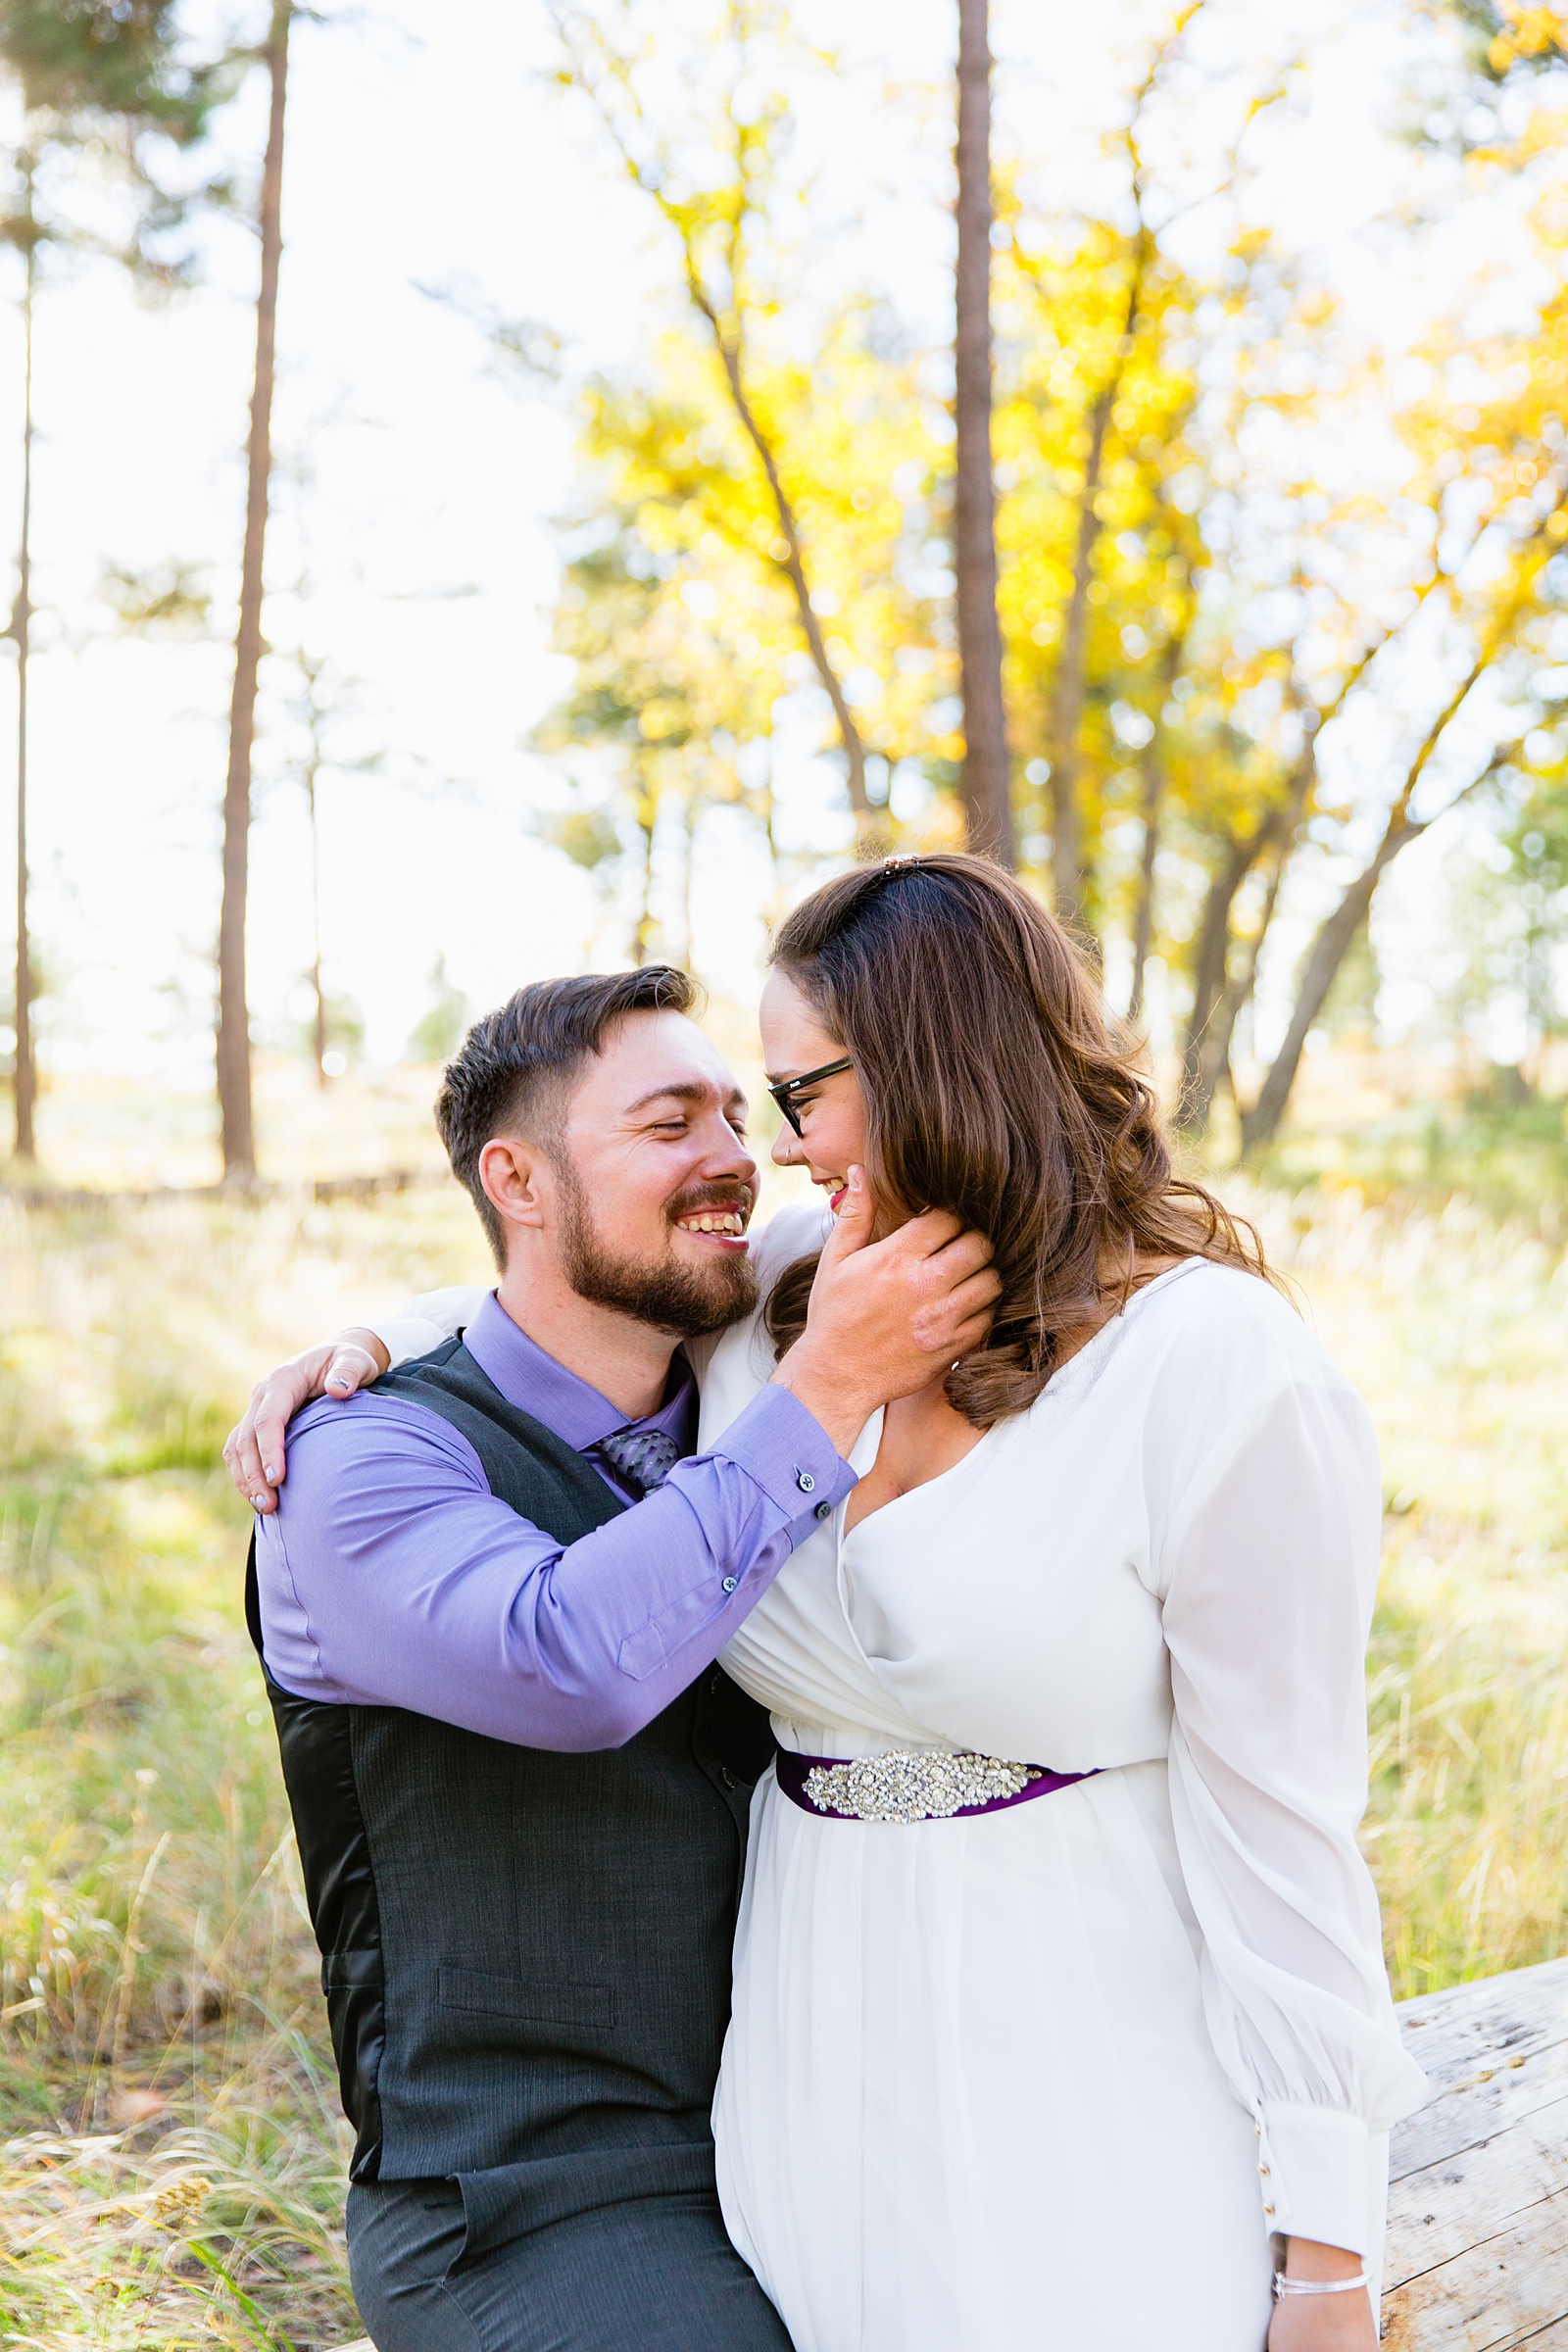 Bride and Groom laughing together during their Mogollon Rim elopement by Arizona elopement photographer PMA Photography.